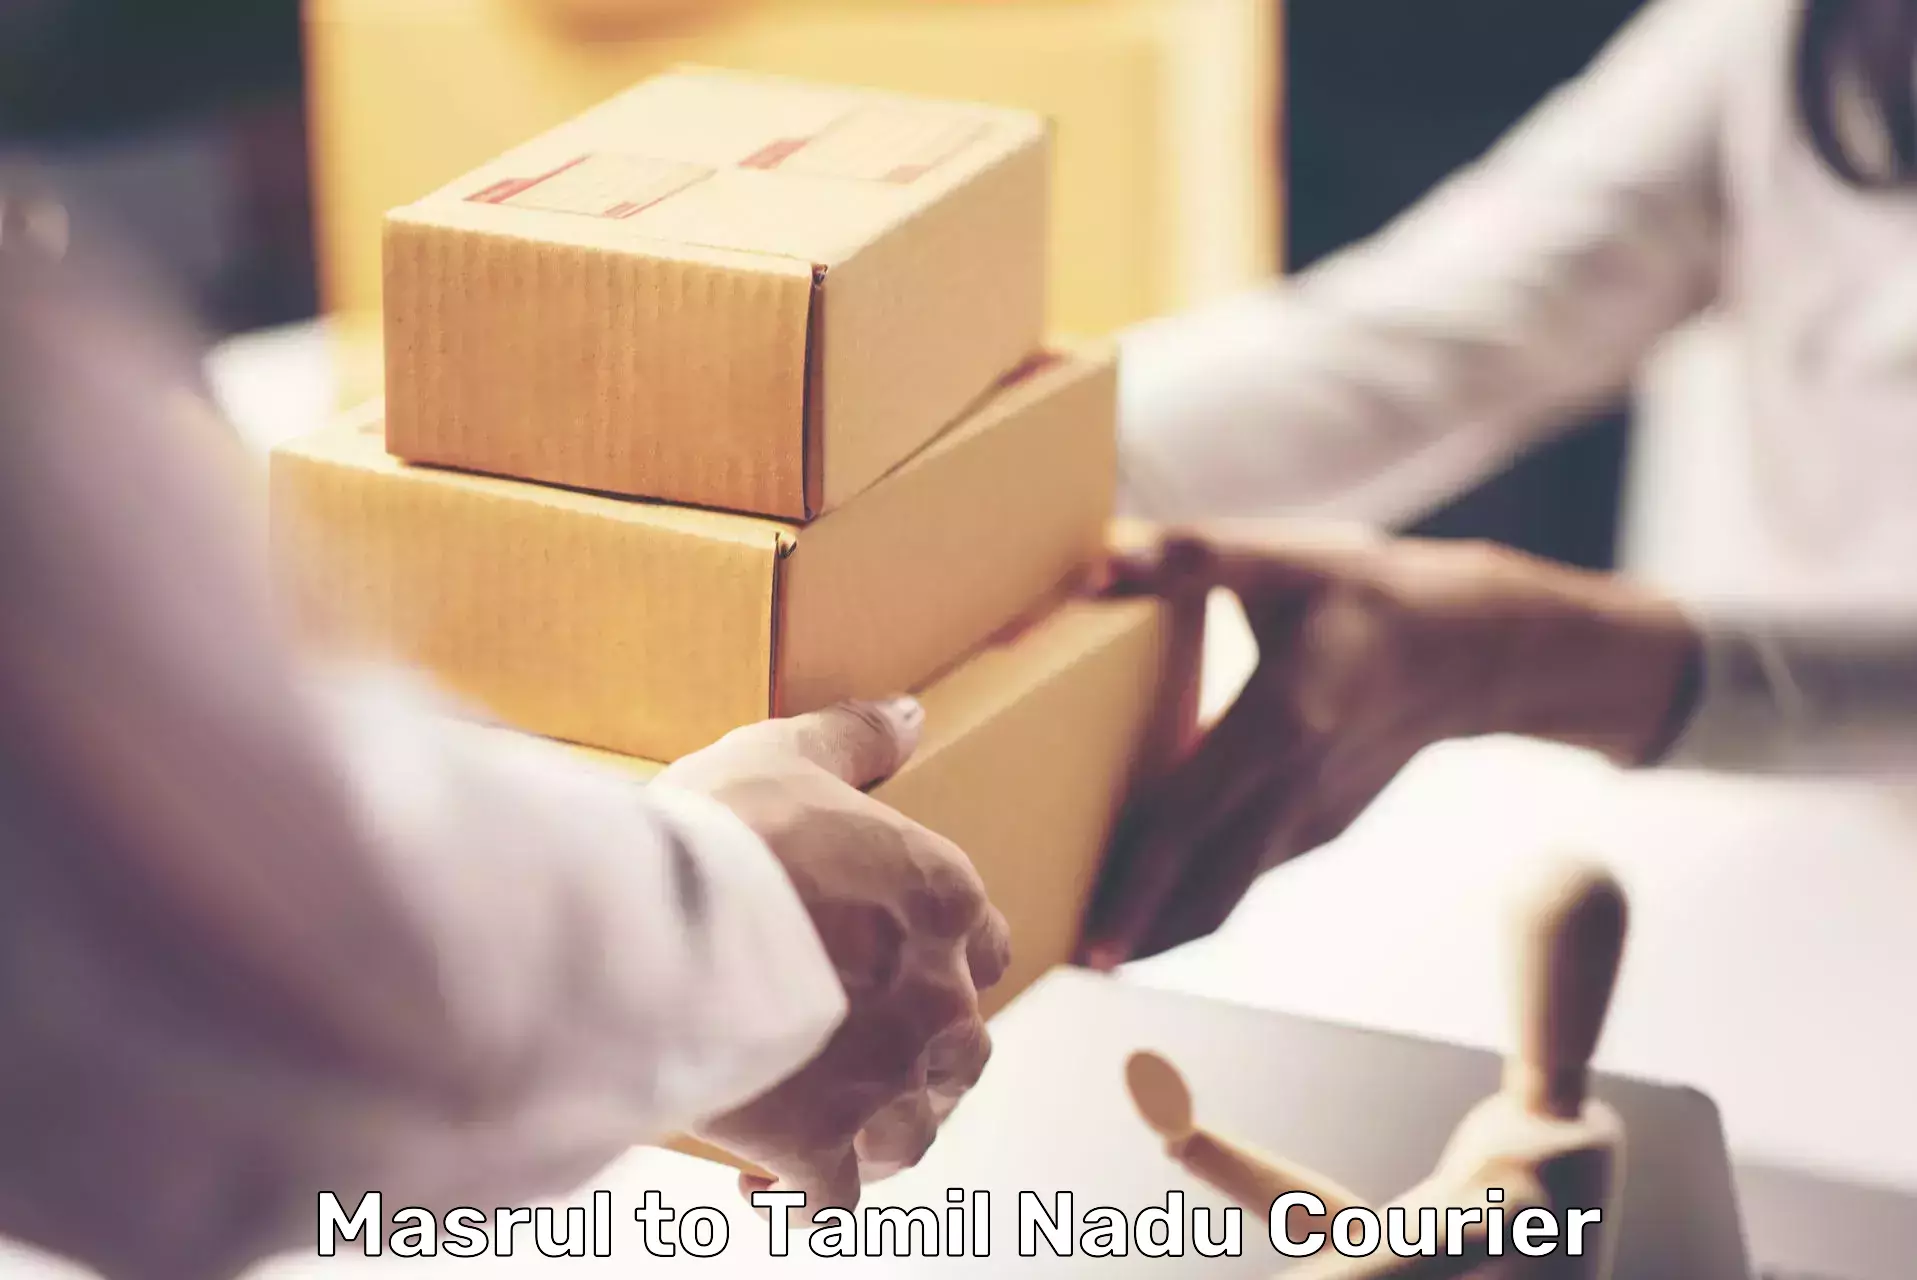 Easy access courier services in Masrul to Salem